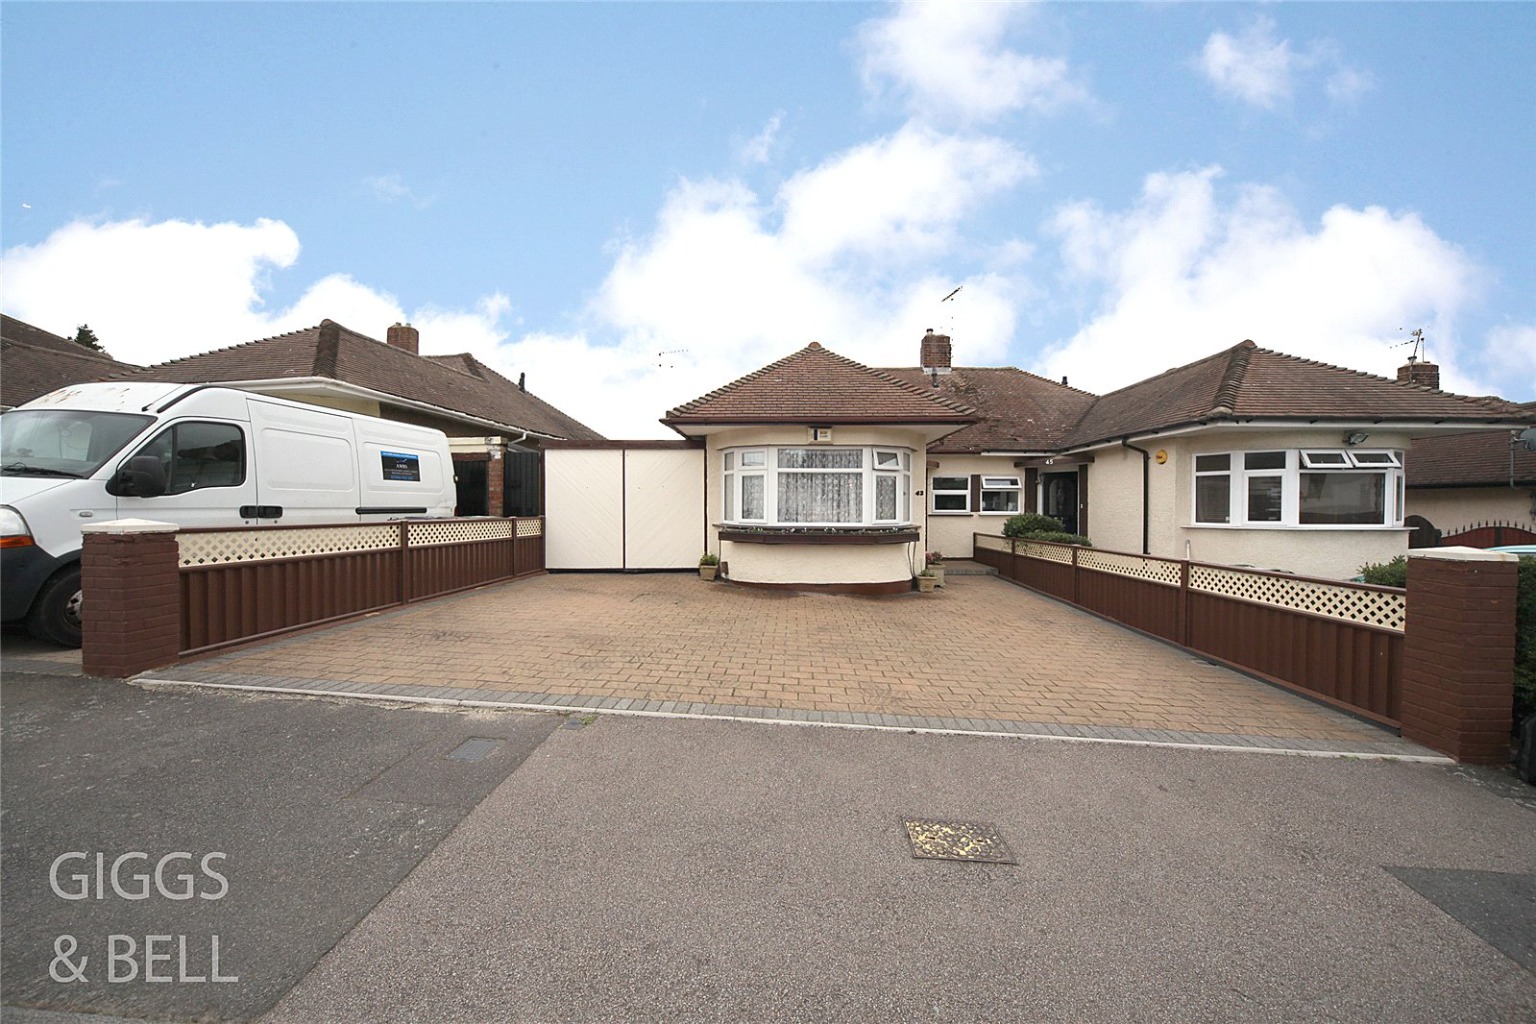 3 bed semi-detached bungalow for sale in Stanford Road, Luton, LU2 